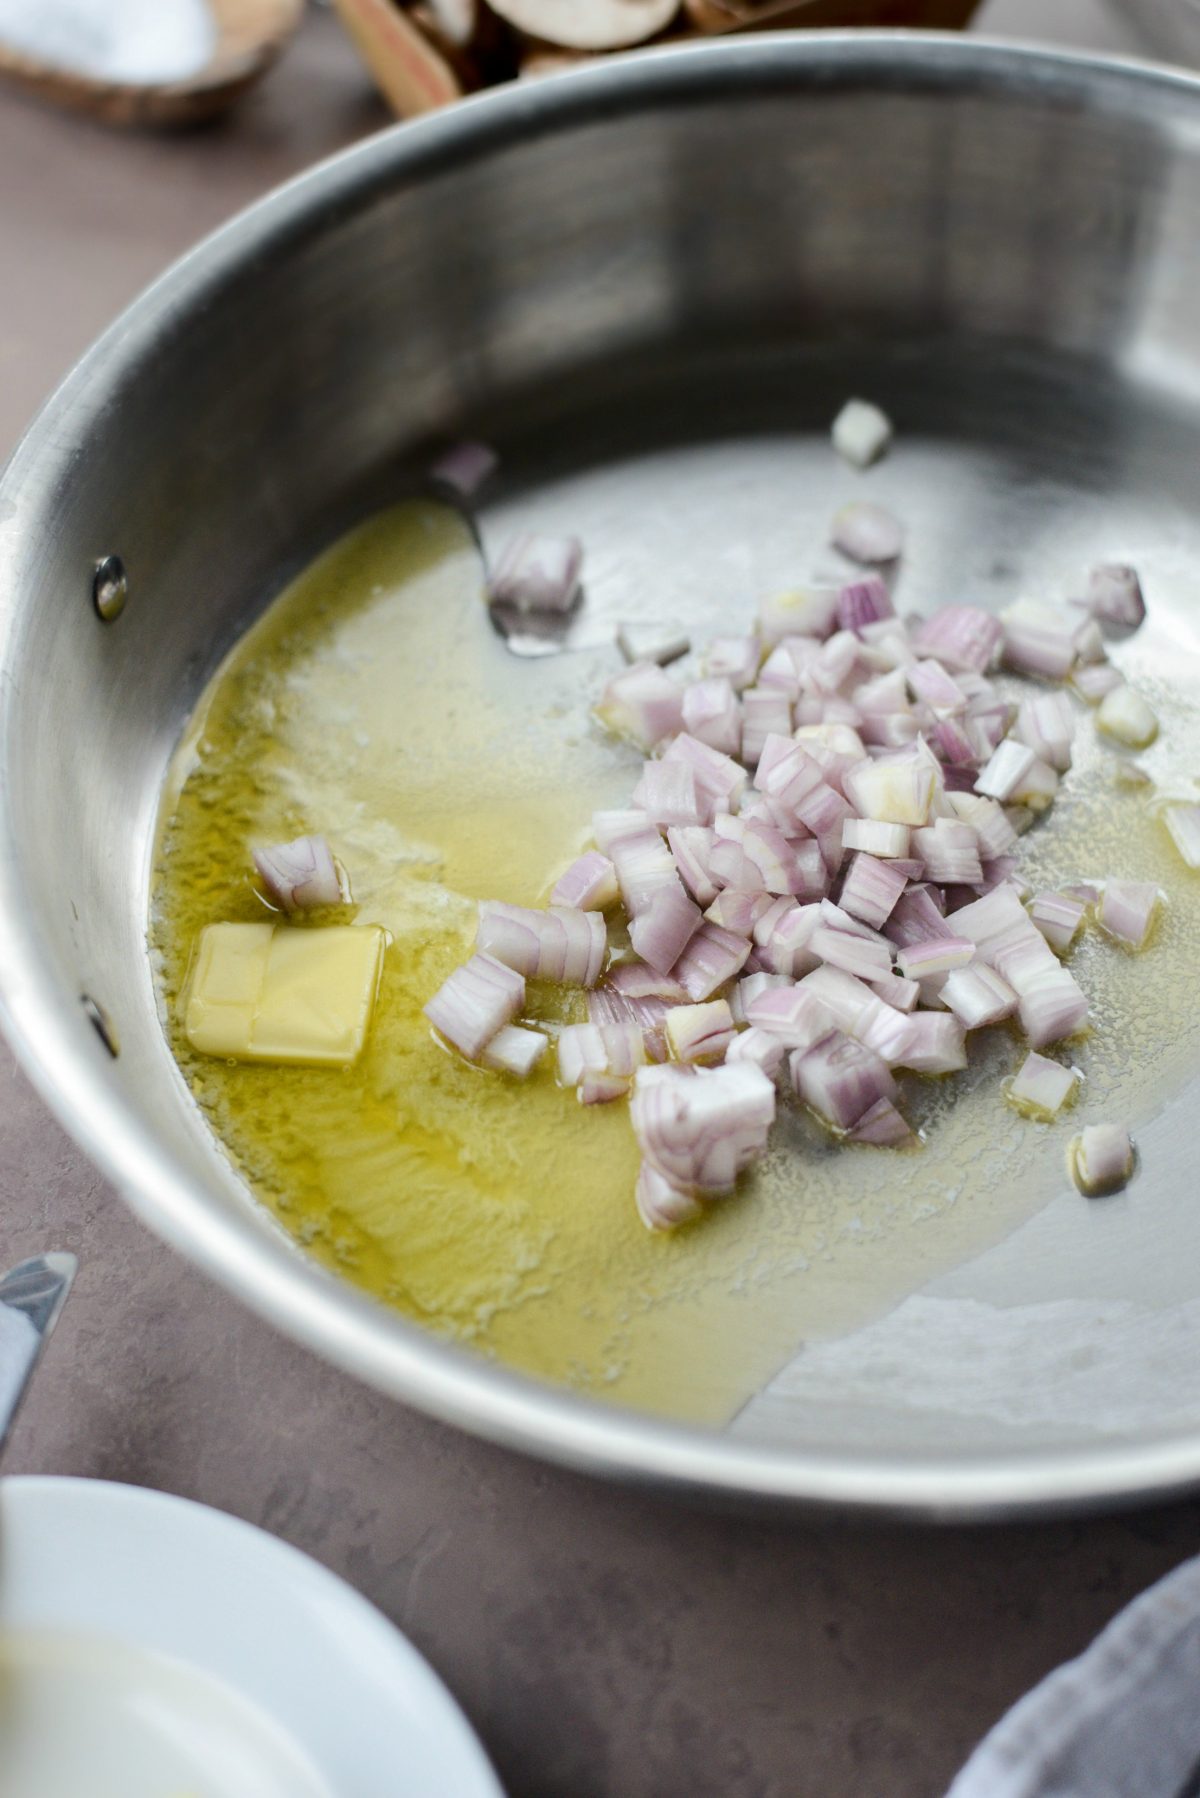 saute shallots with butter